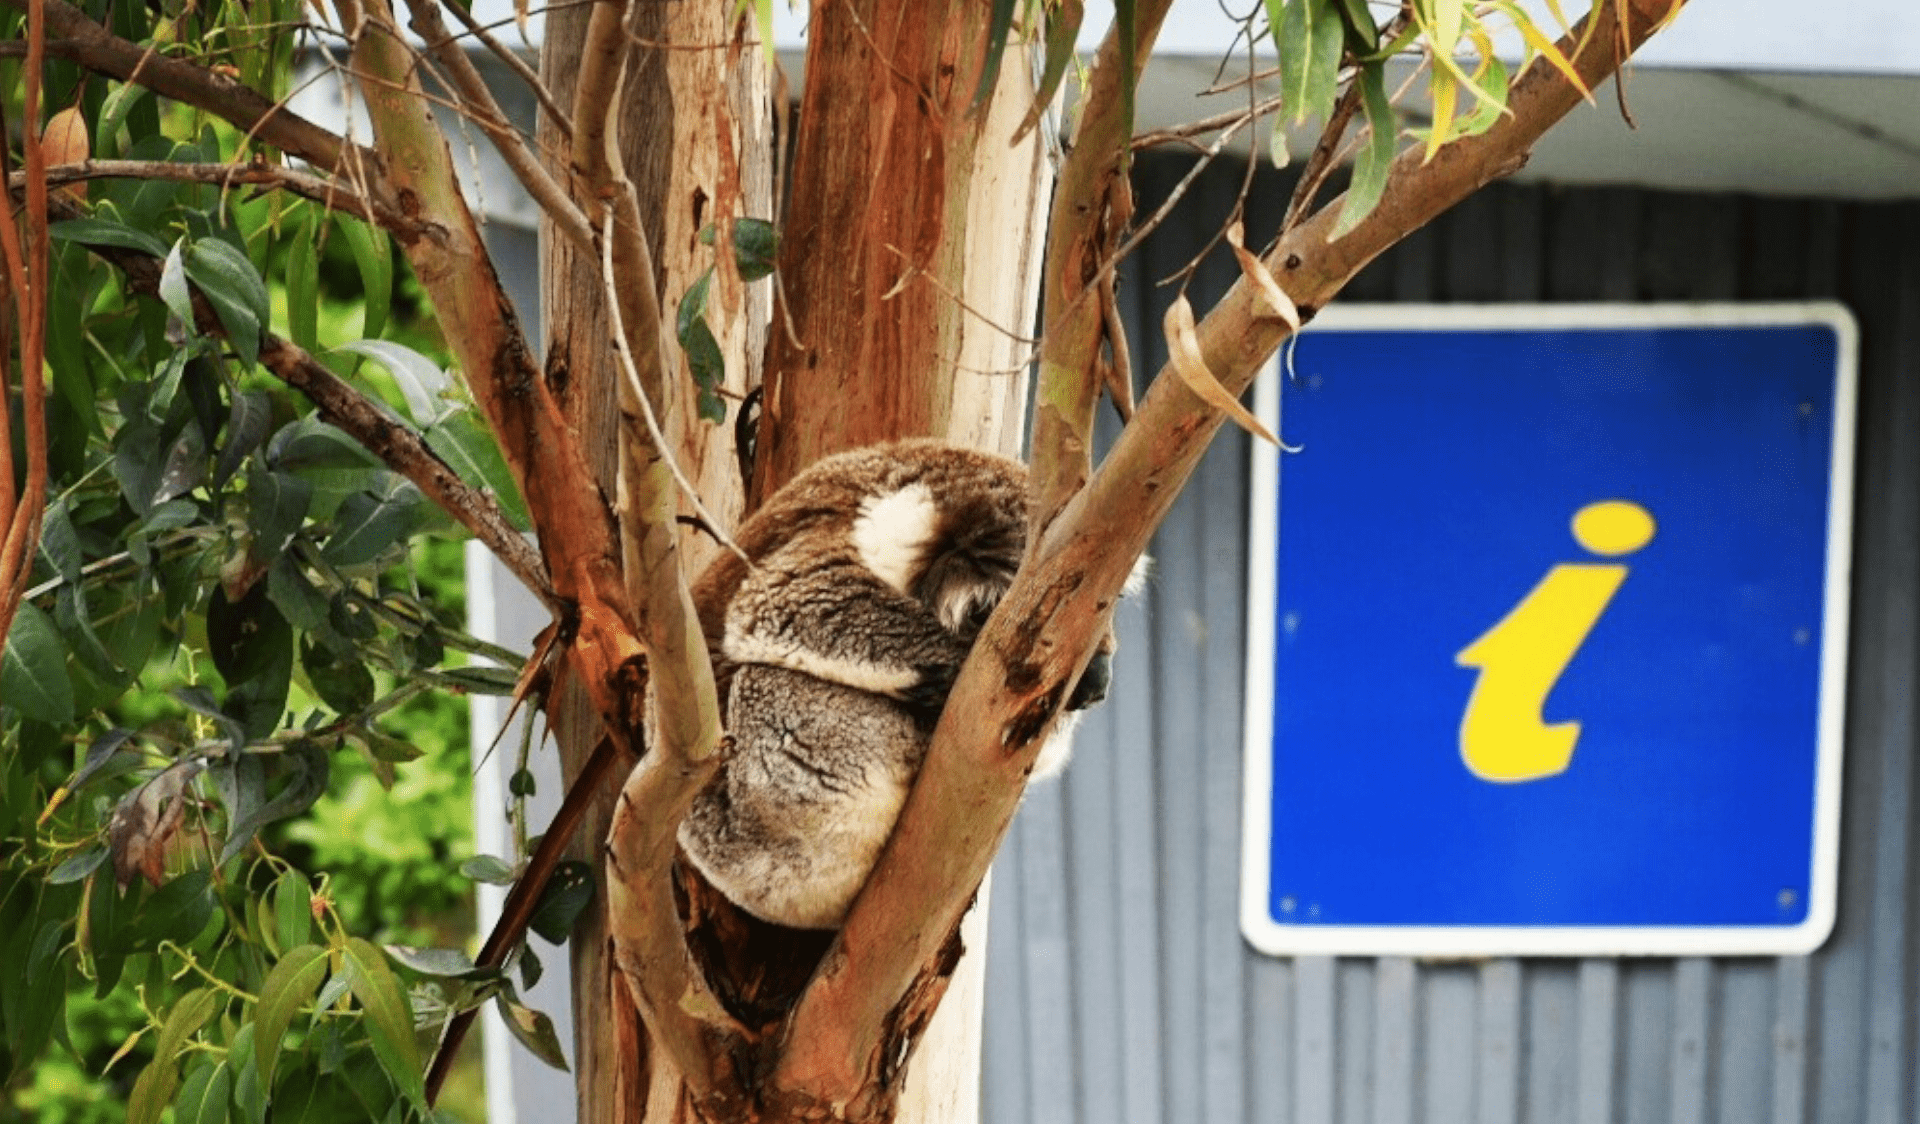 A koala sits in a tree beside a Visitor Information sign on a tin building